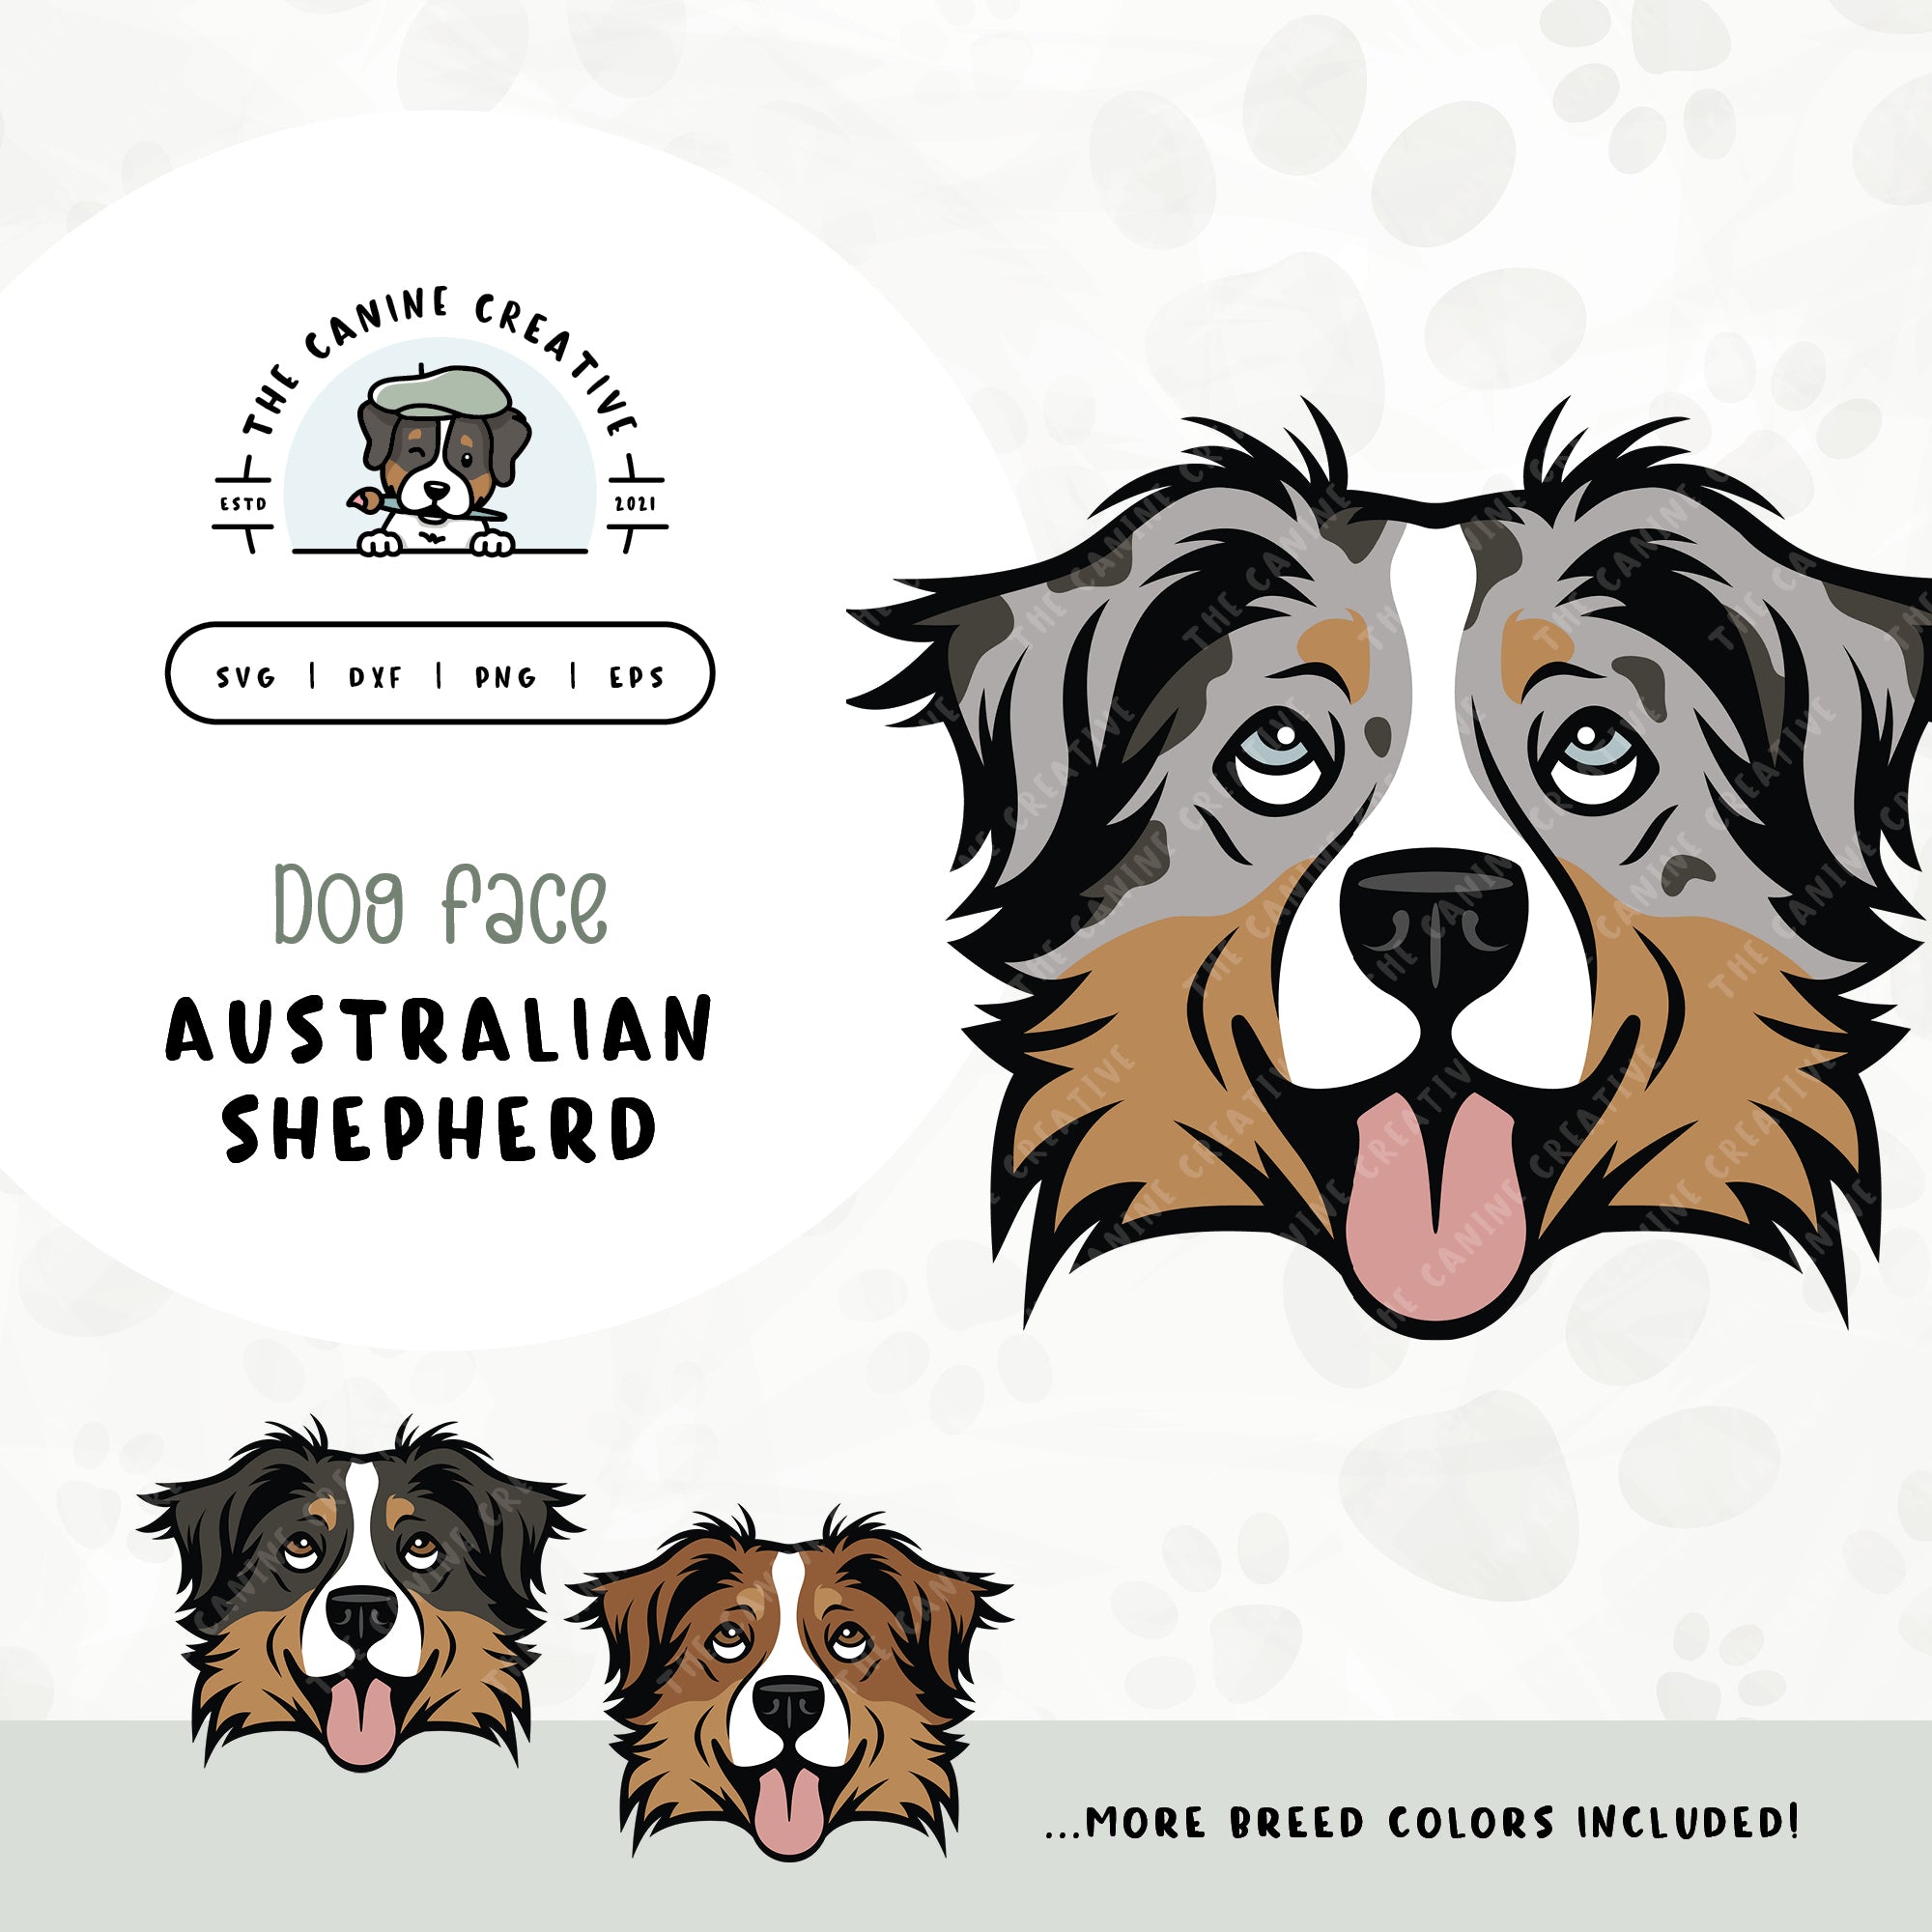 This illustrated design features an Australian Shepherd face. File formats include: SVG, DXF, PNG, and EPS.